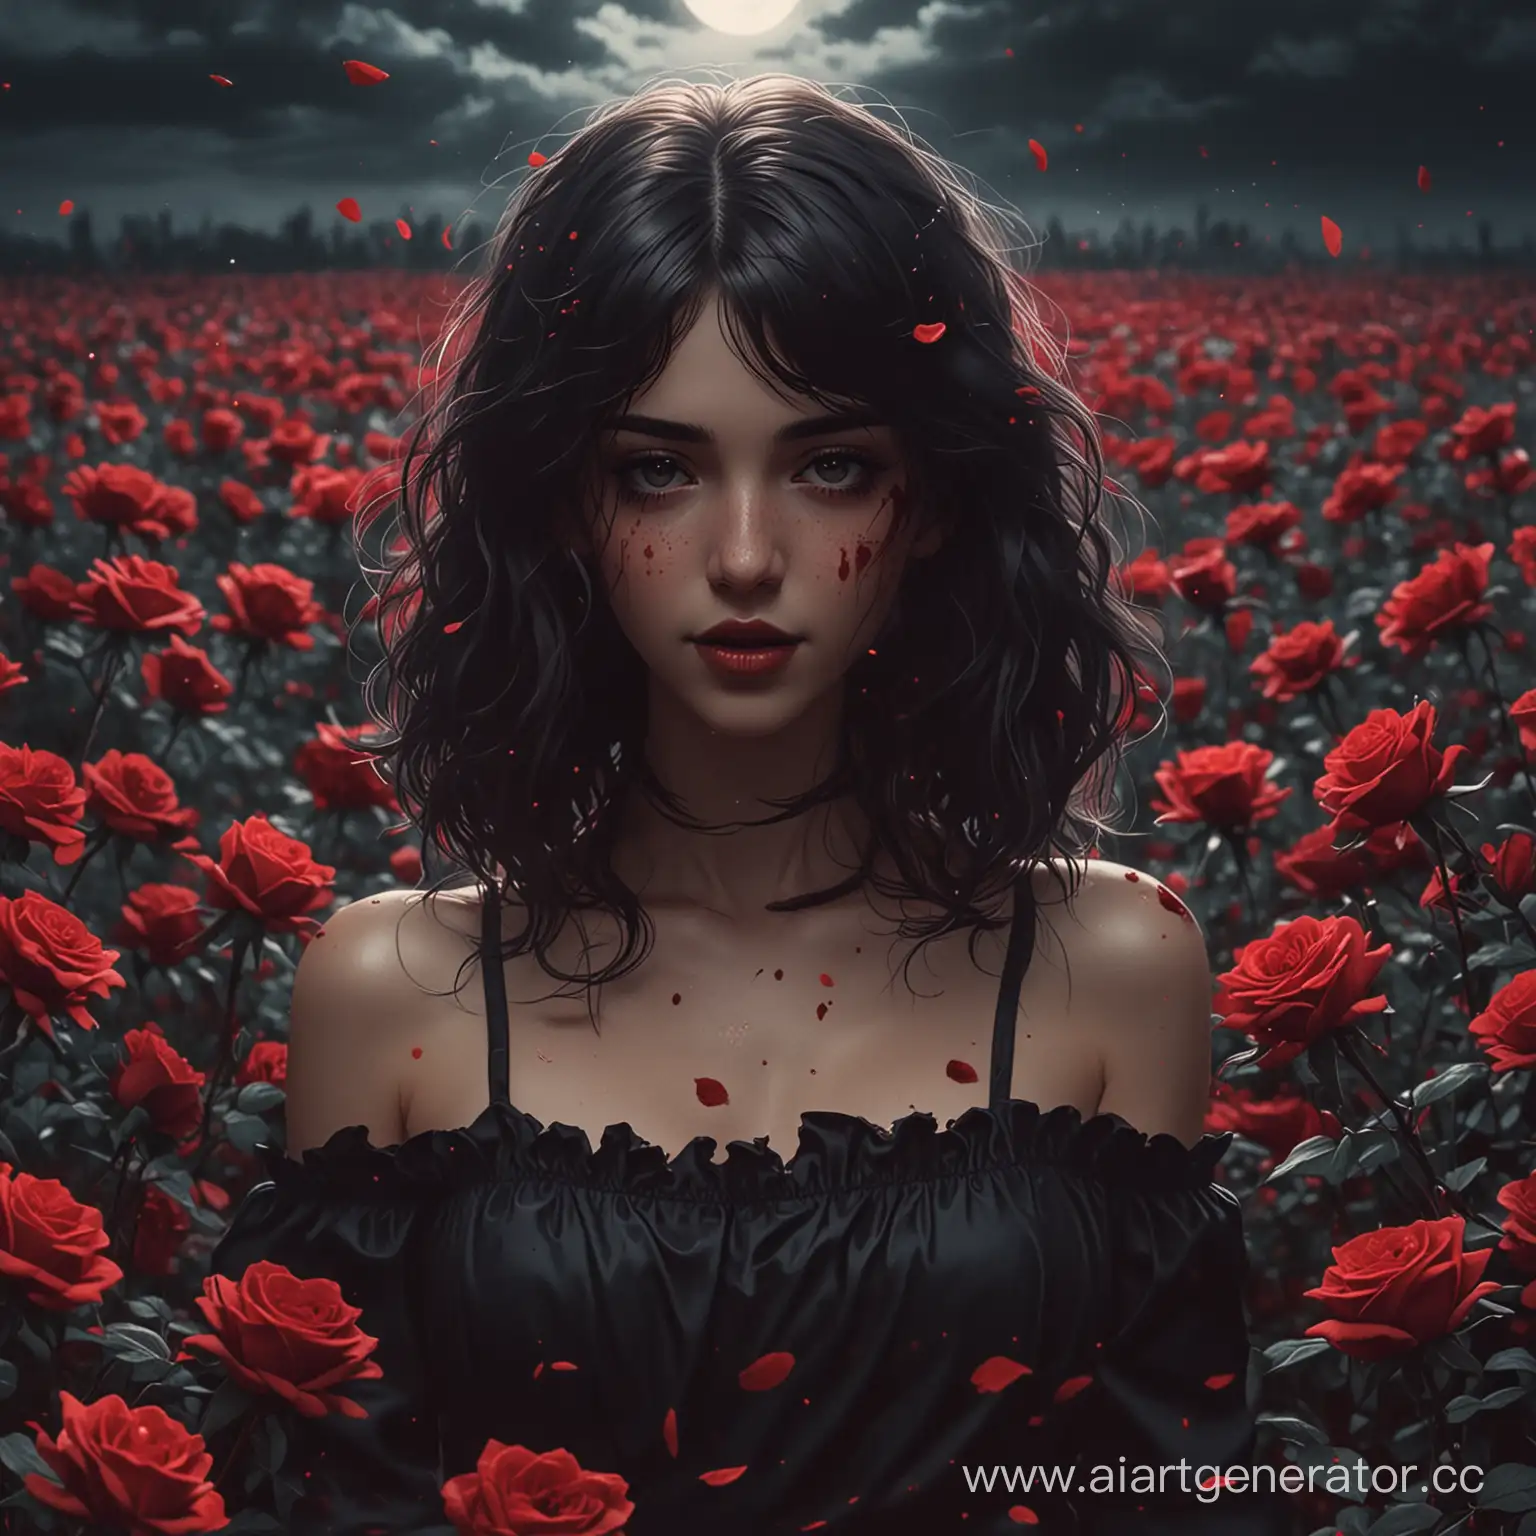 Anime-Girl-Embraced-by-Retro-Wave-Music-in-Dark-Aesthetics-amidst-Red-Roses-and-Shadows